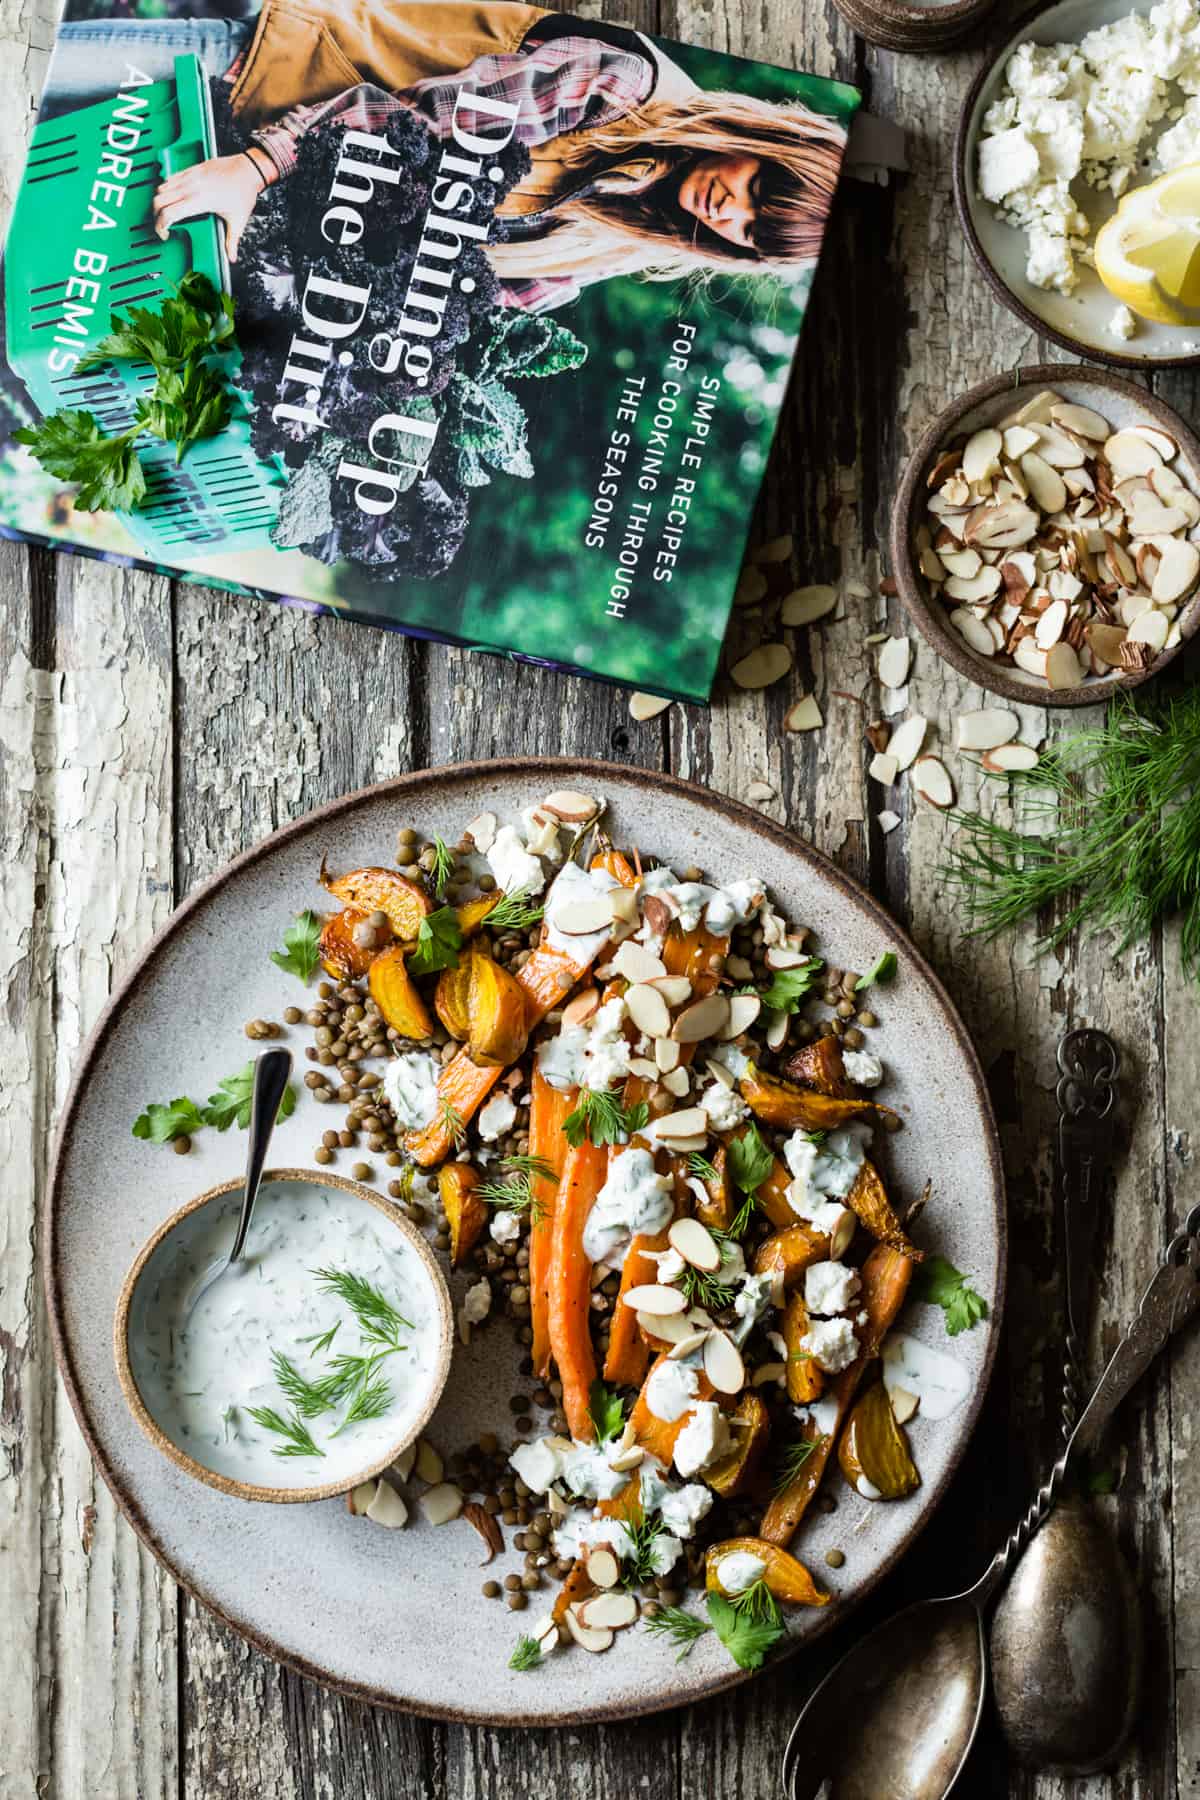 Roasted Beet & Carrot Lentil Salad with Feta, Yogurt & Dill with cookbook